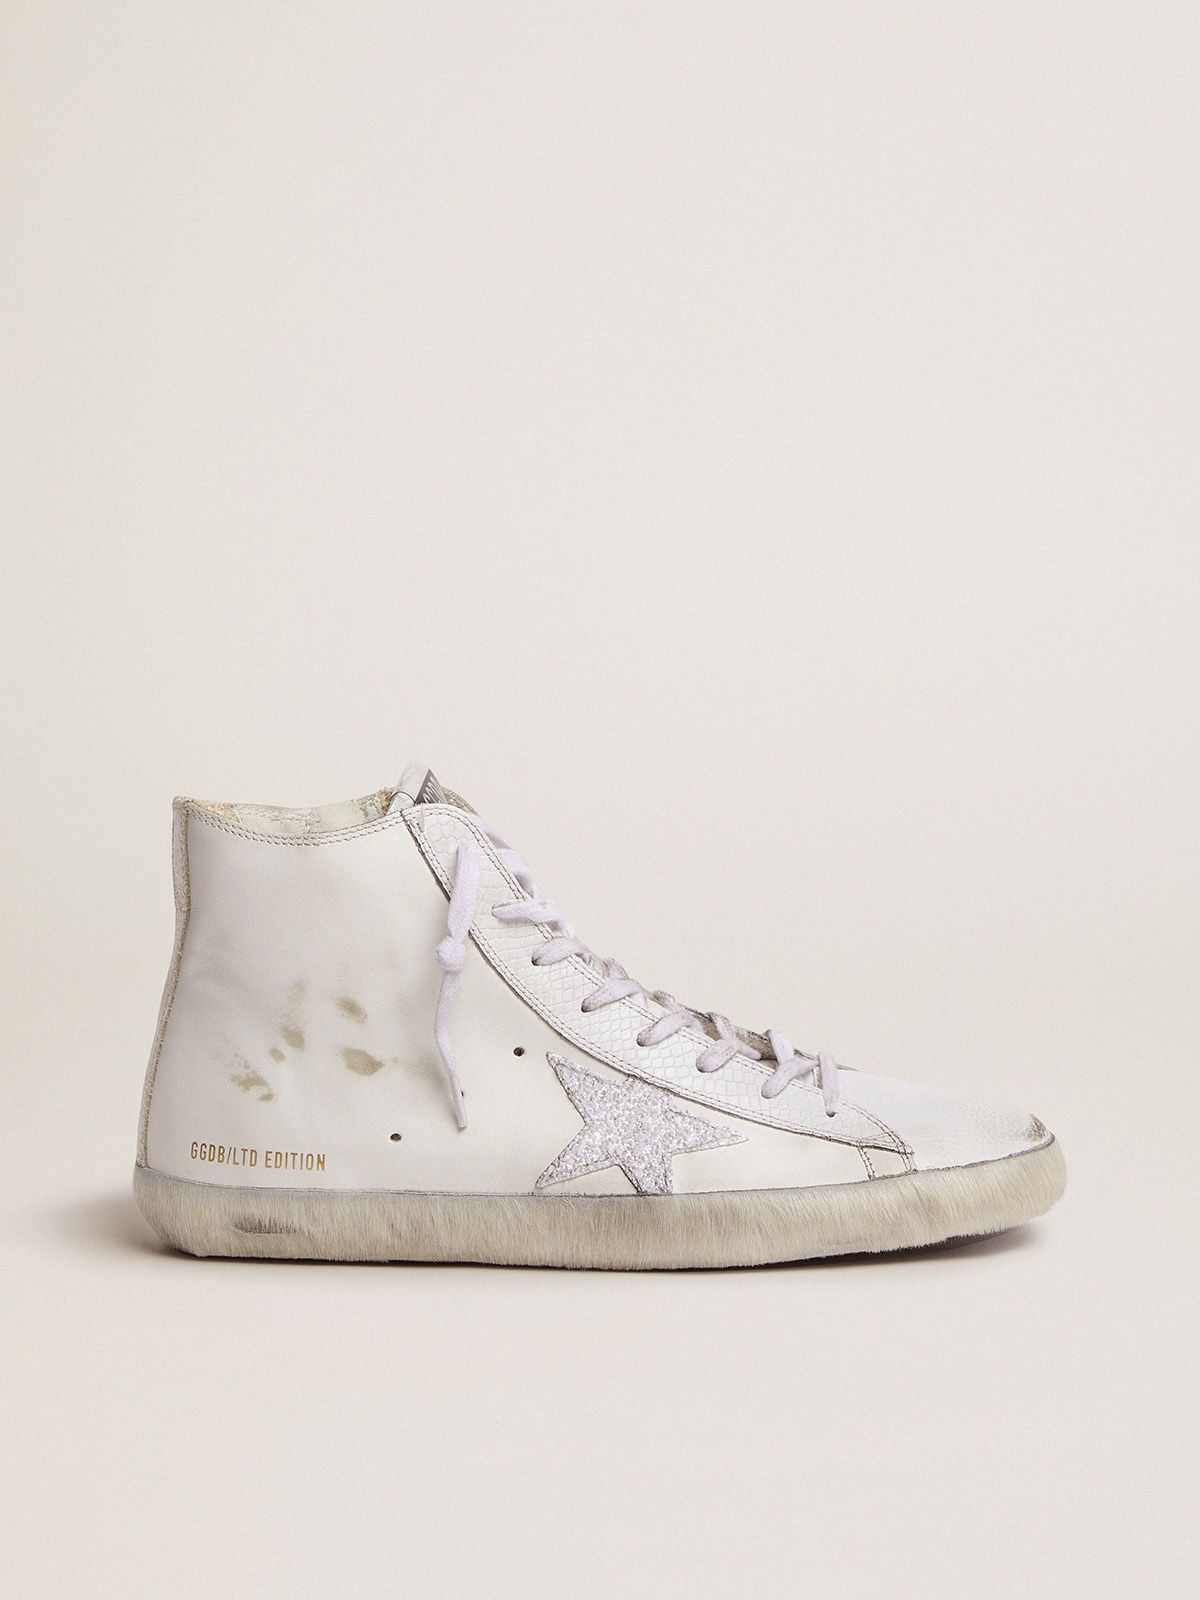 Men’s LAB Limited Edition white and glitter Francy sneakers